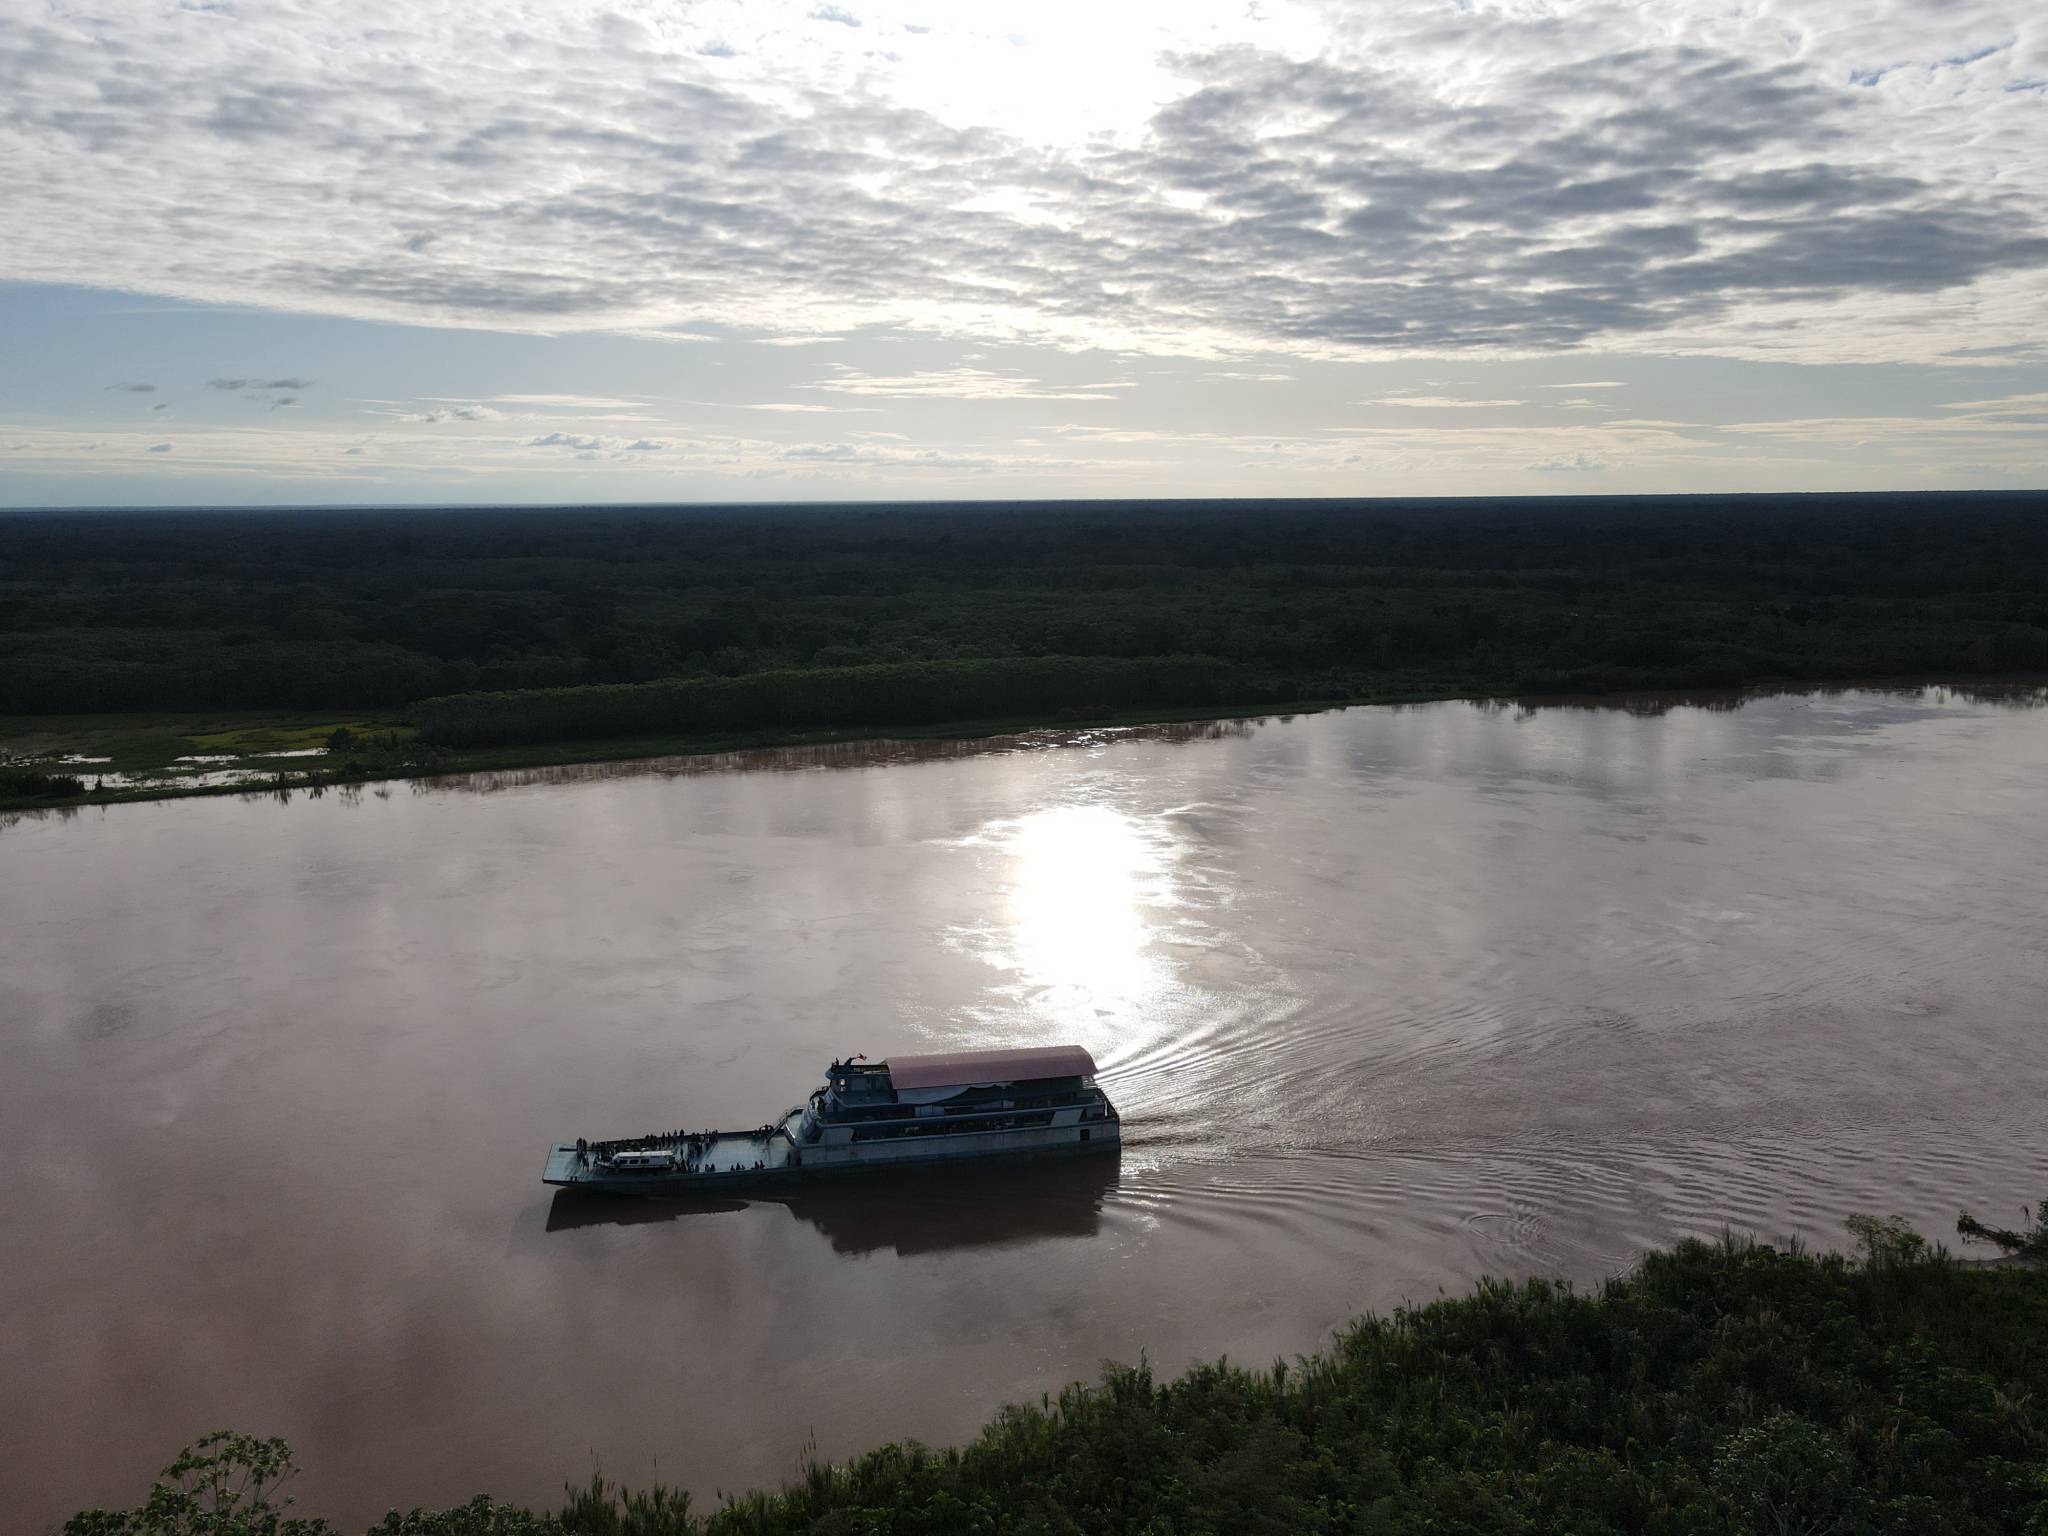 A Barge filled with 200 missionaries/evangelists on the Amazon River.